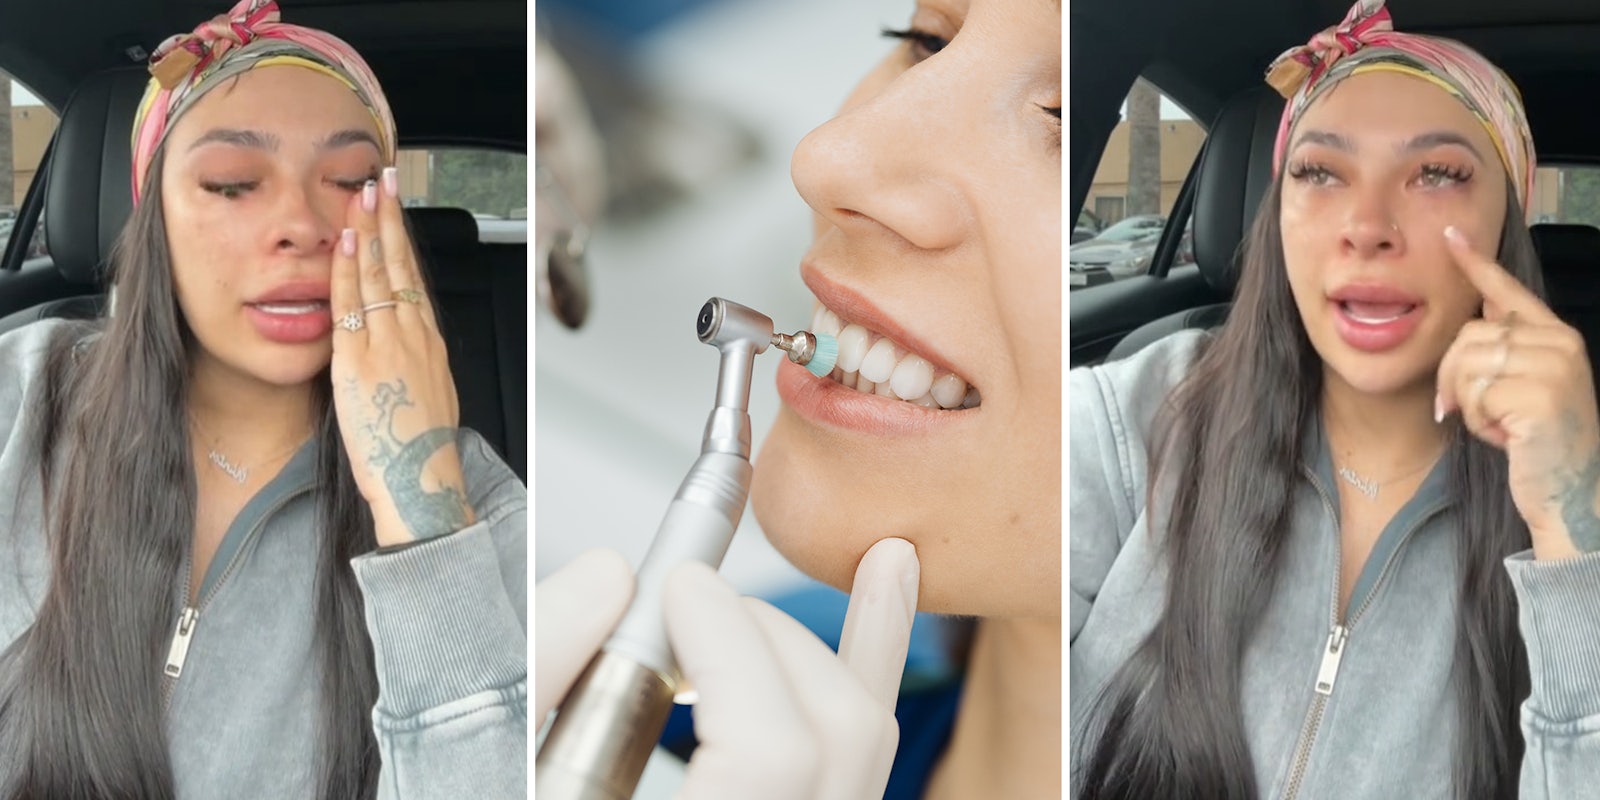 Woman issues dire warning about what can happen when you get veneers